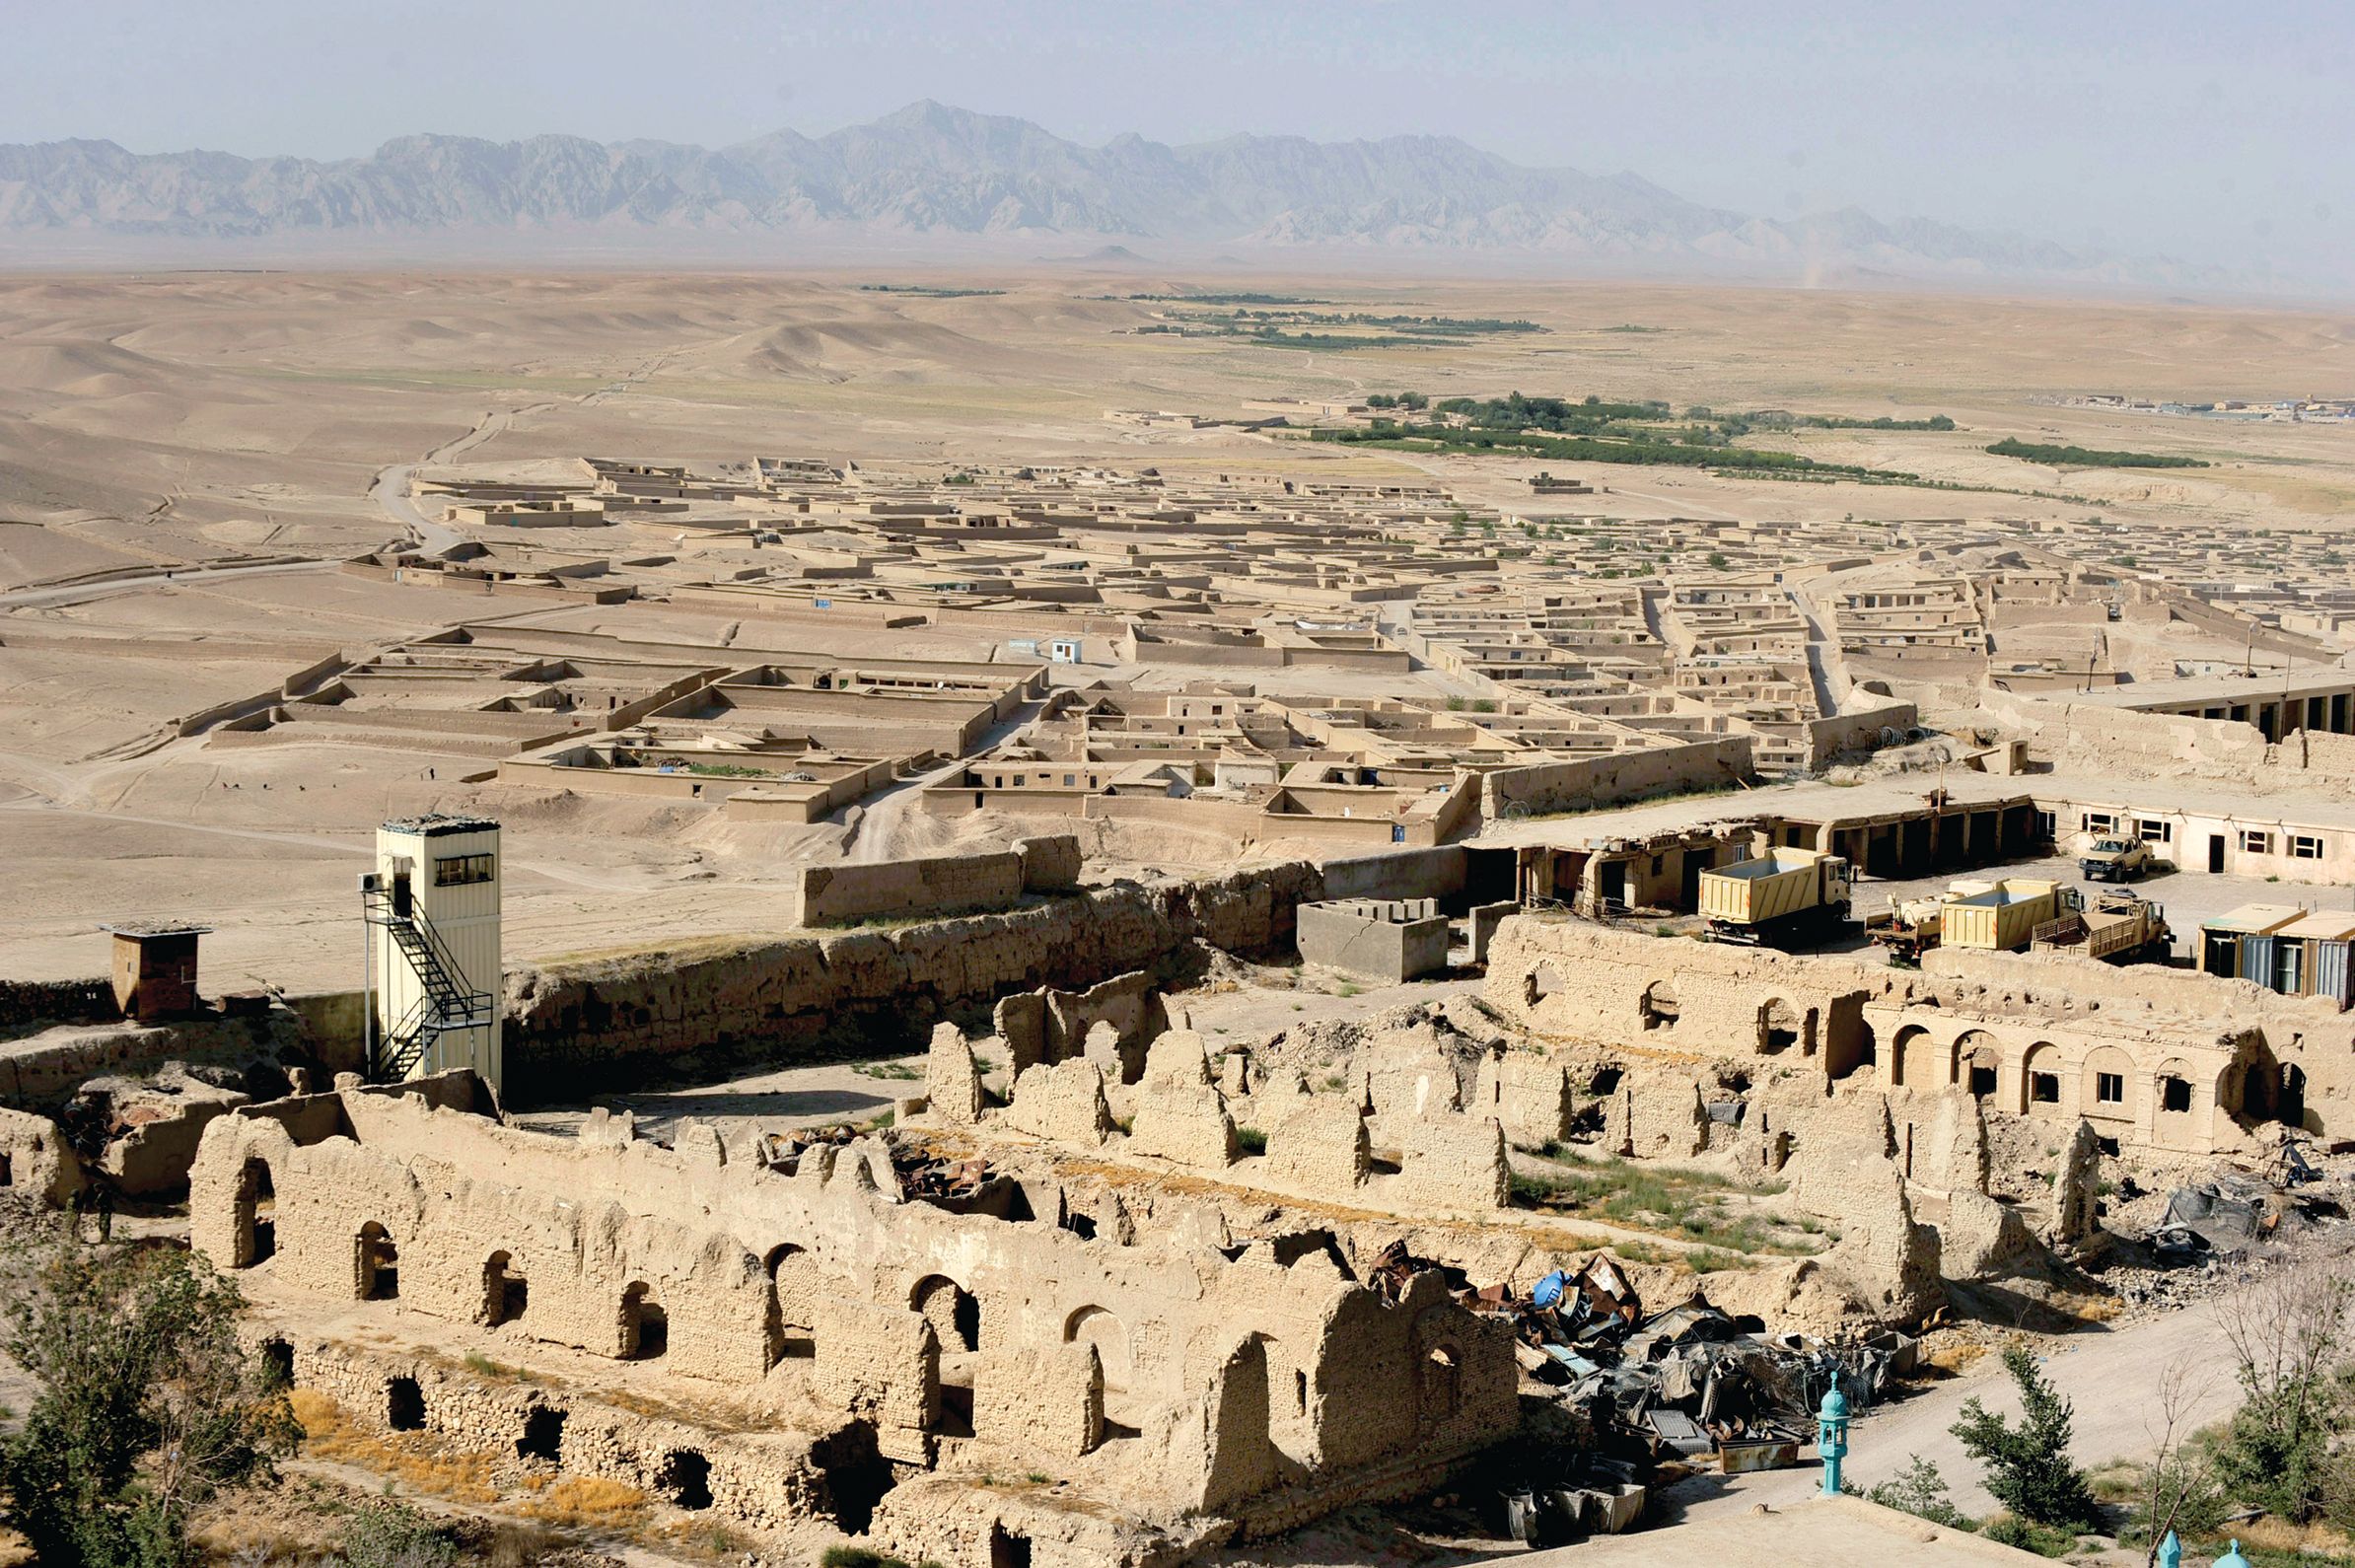 According to local officials, this fortress in Qalat City, Afghanistan was built by Alexander the Great during his push to India. Since then, nearly every military force has used it, including the British, the Russians, the Taliban, and the Americans.